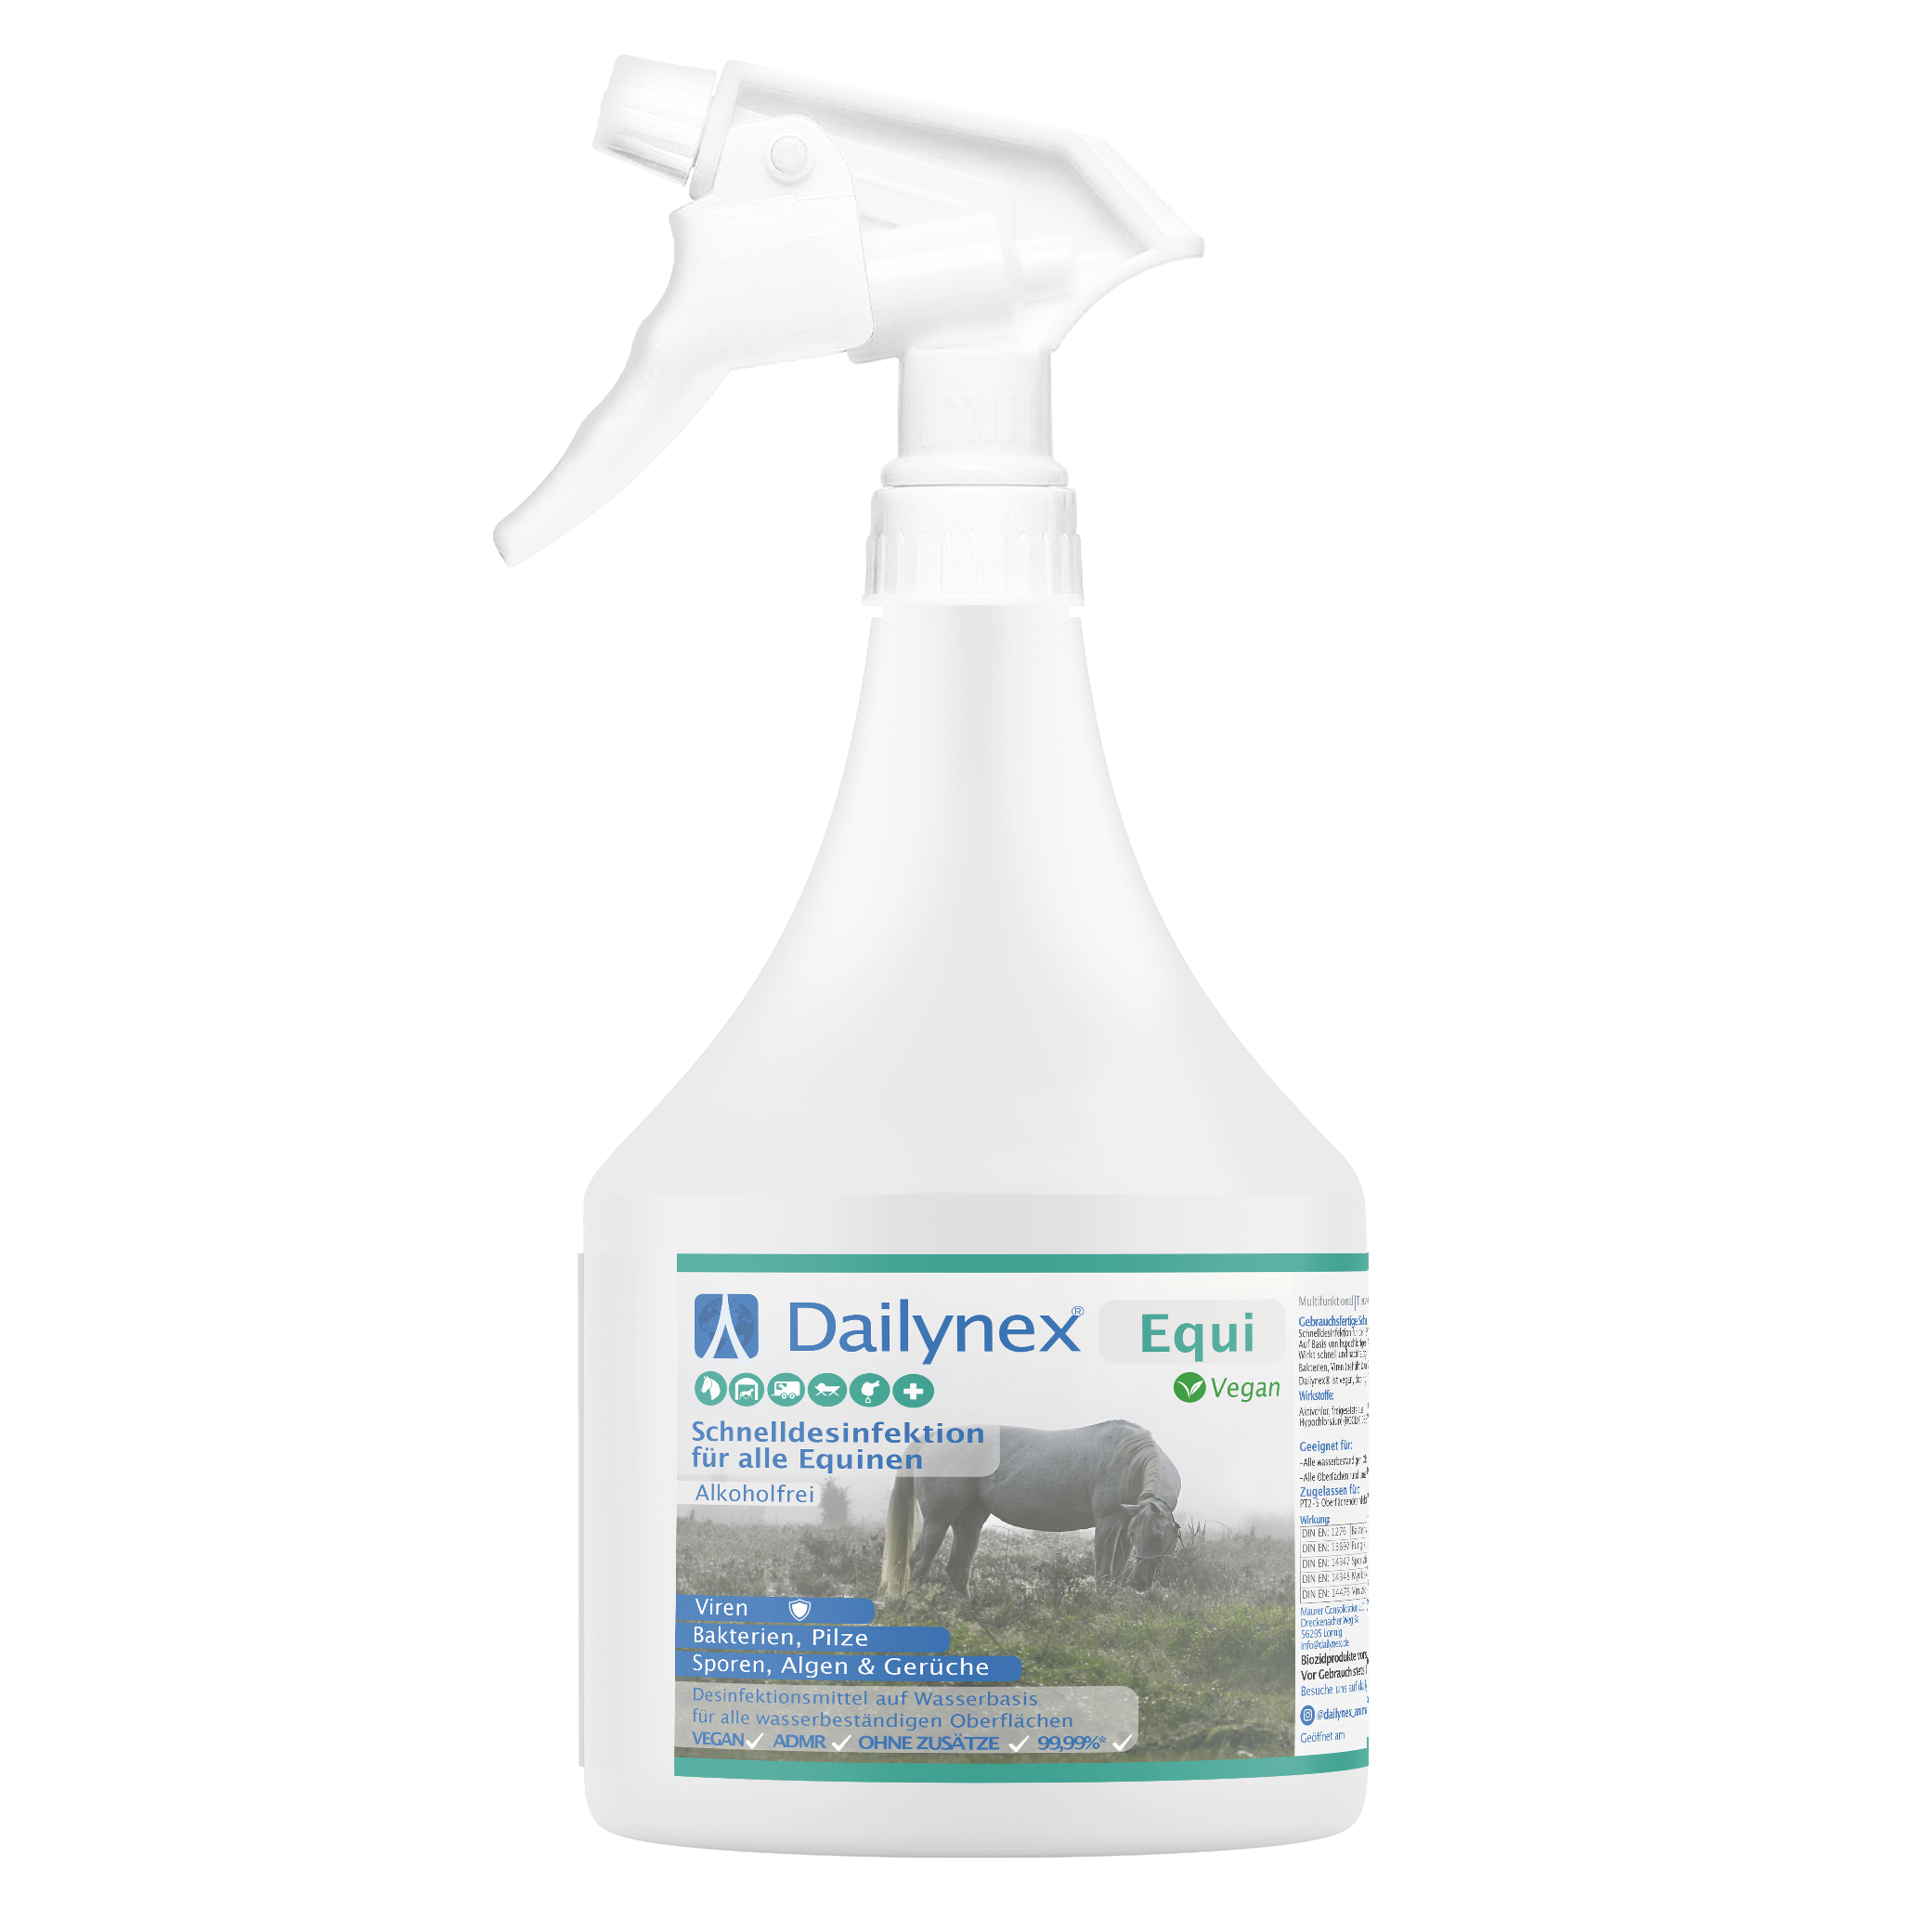 Disinfectant for horses, stables, boxes, hooves, skin, hay